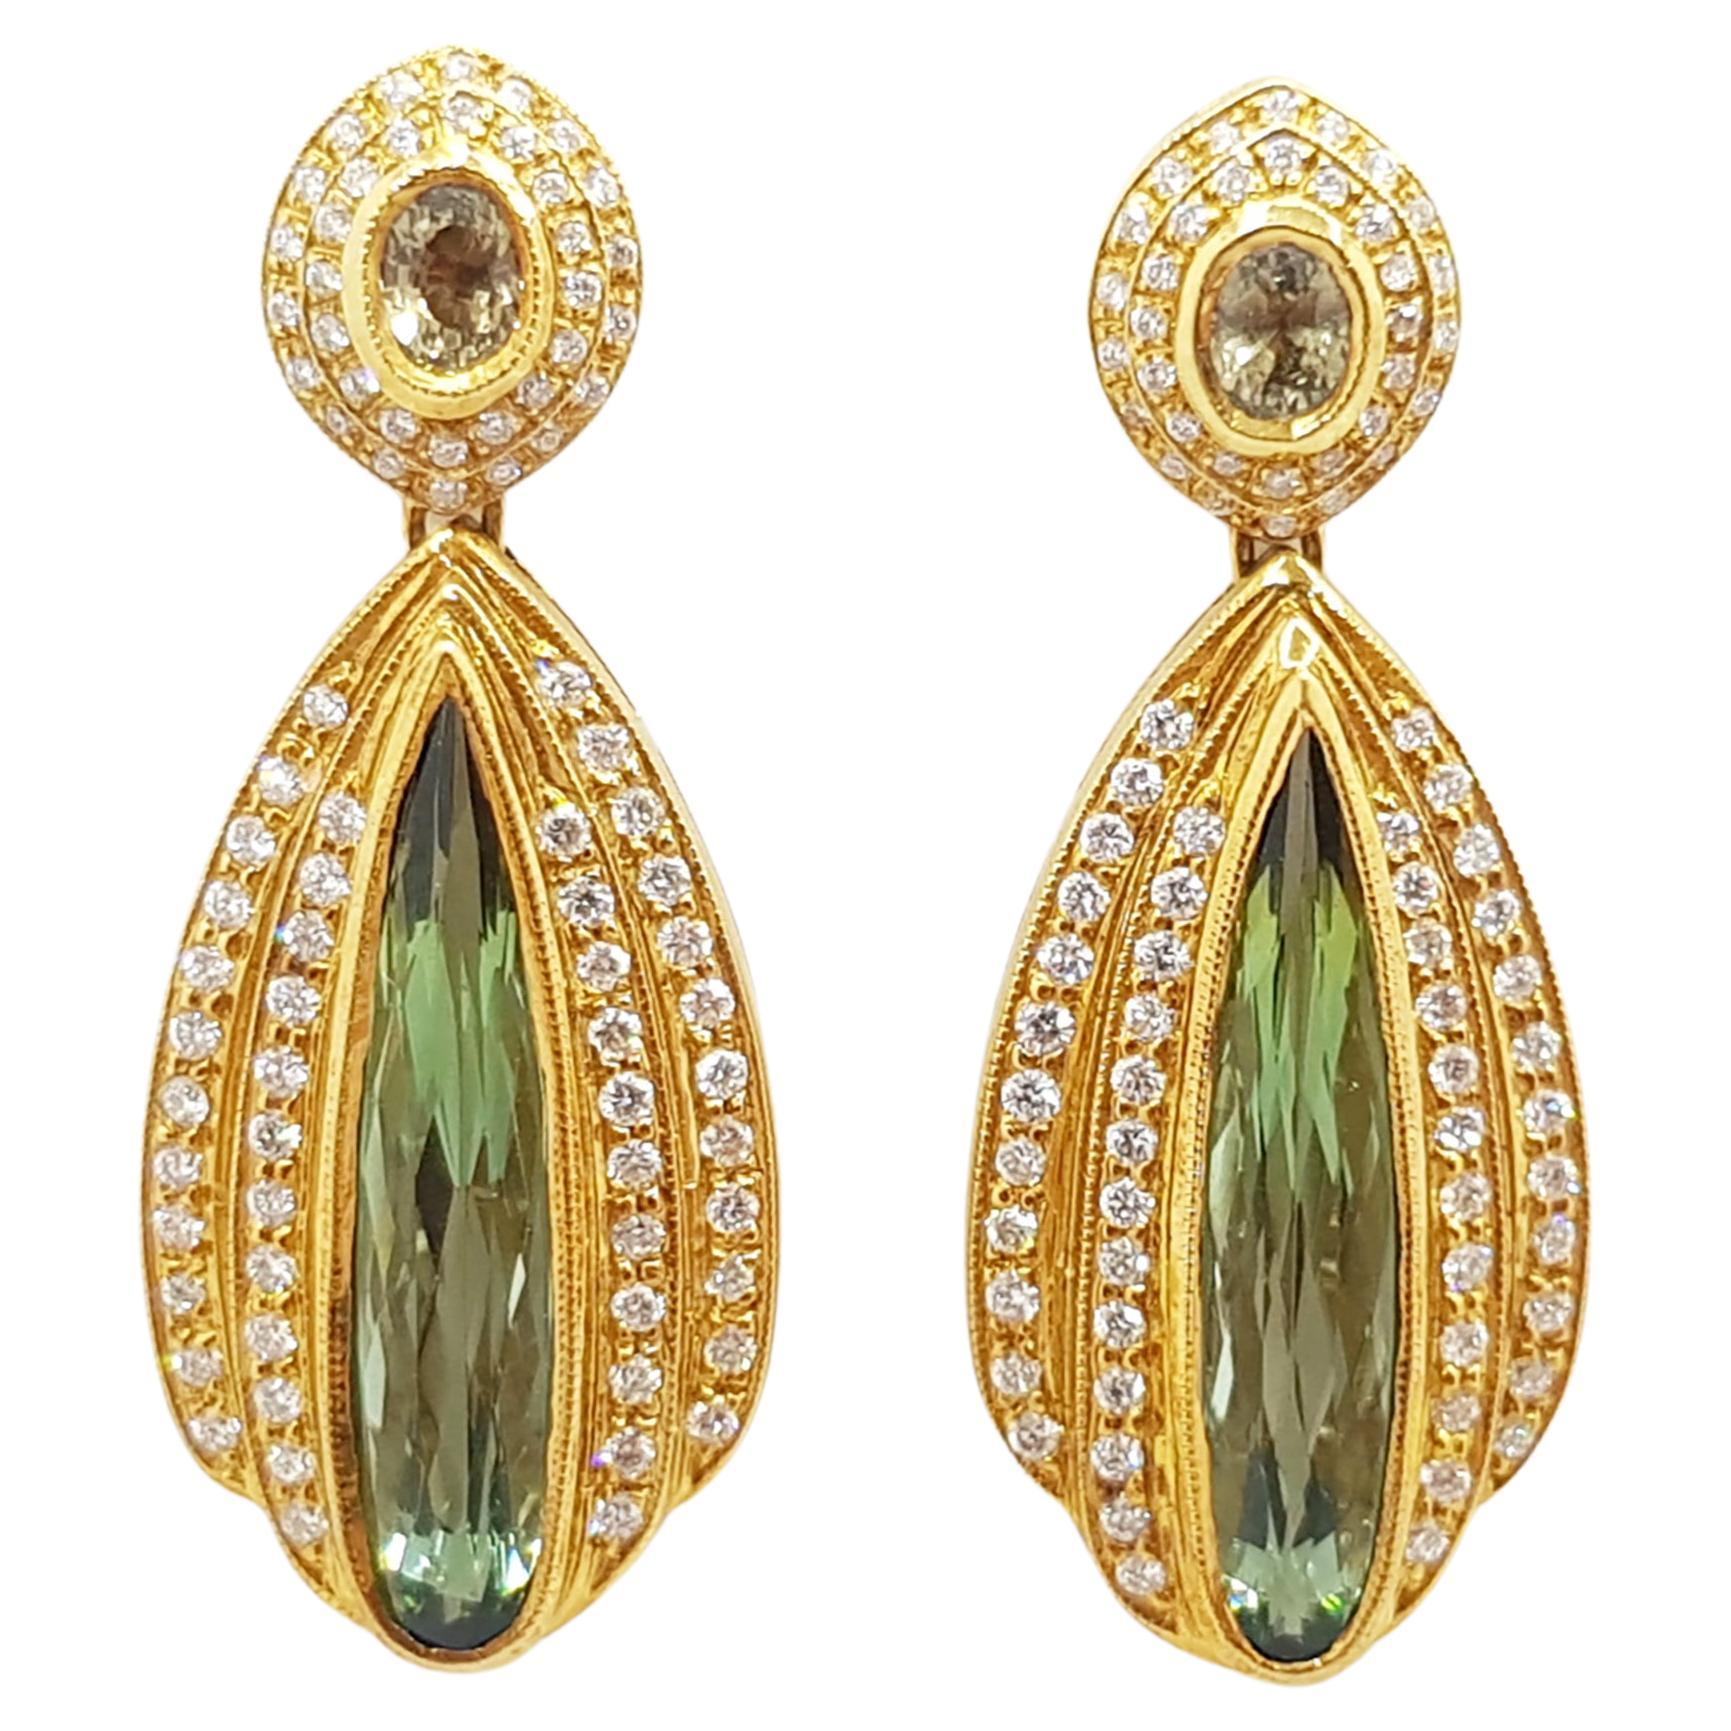 Green Tourmaline with Brown Sapphire and Diamond Earrings Set in 18 Karat Gold